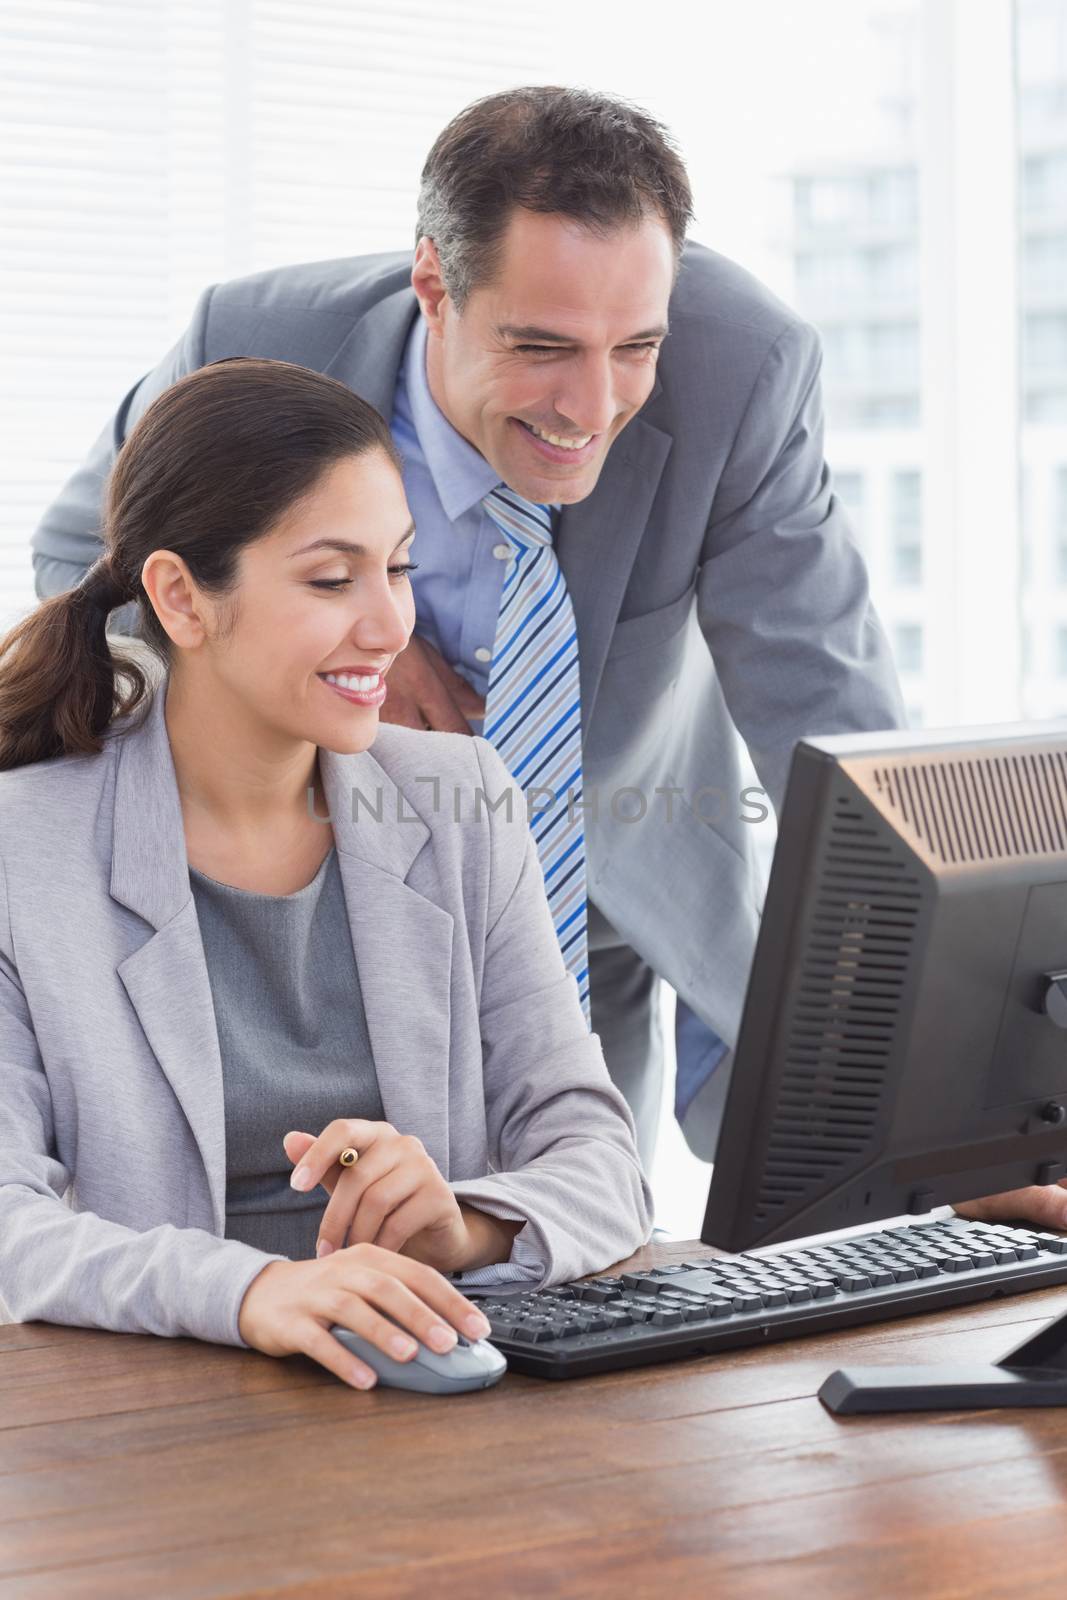 Smiling business partners working together in an office